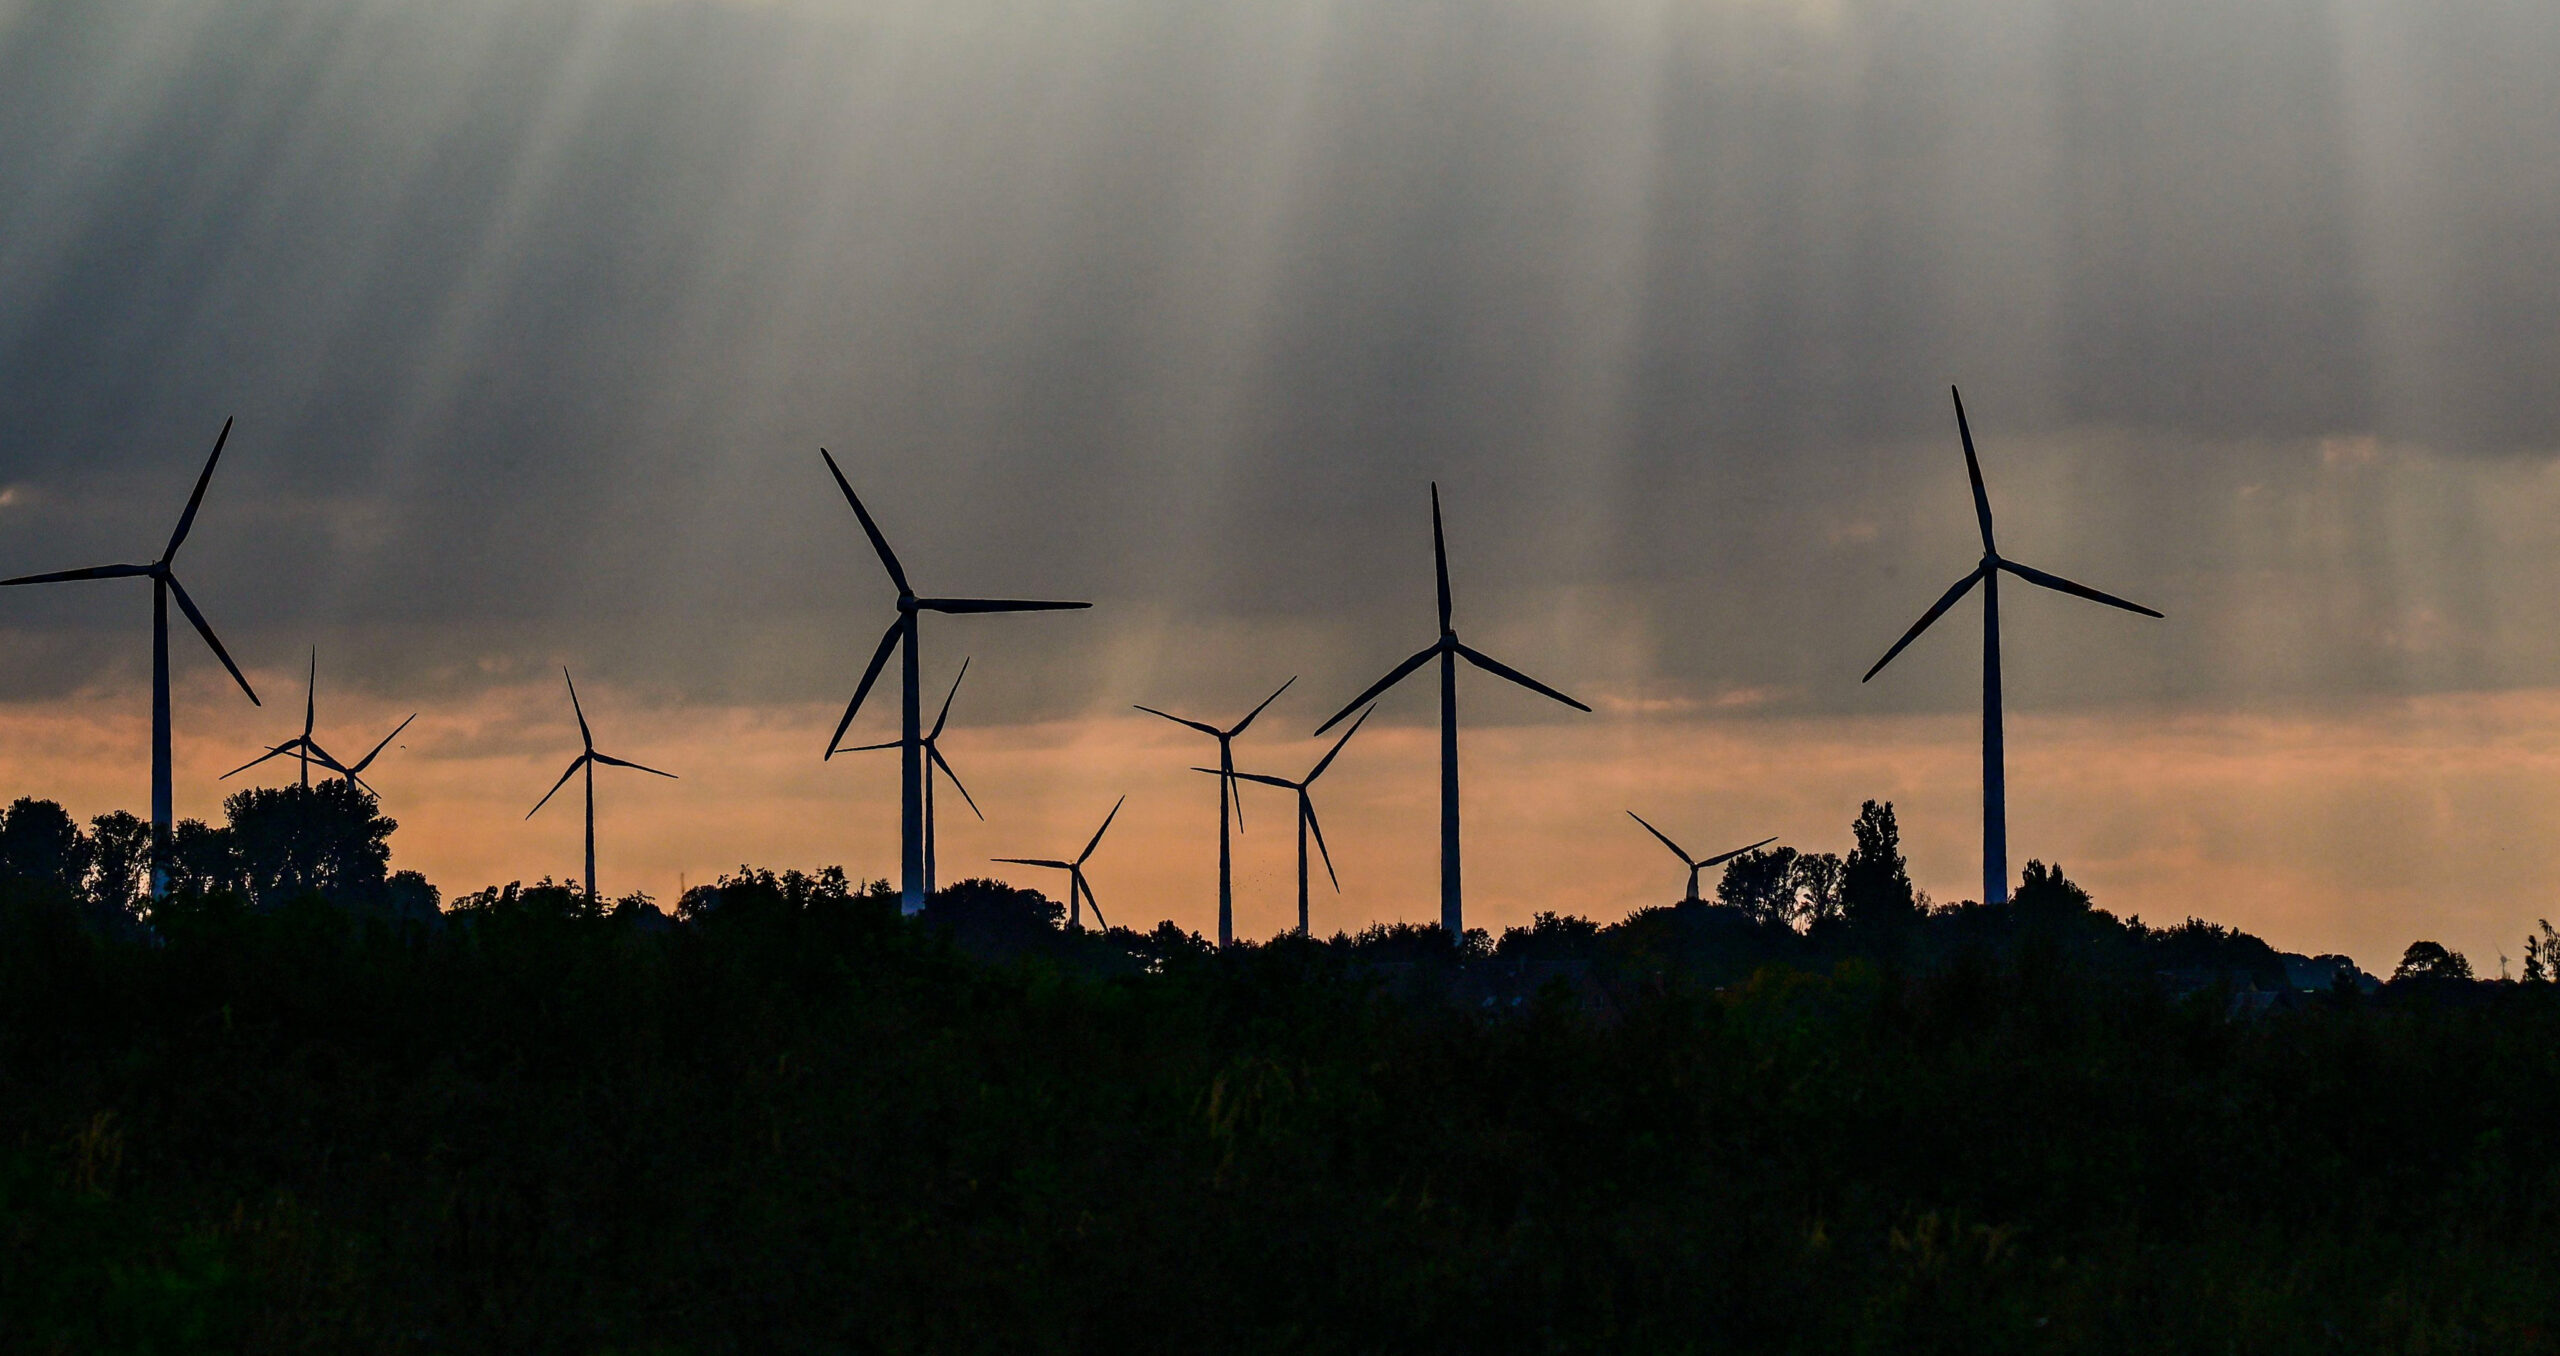 A successful UK clean energy transition is dependent on government, business and civil society working together effectively, according to a report by Energy UK and Oxford Economics (Photo: INA FASSBENDER/AFP via Getty Images) 